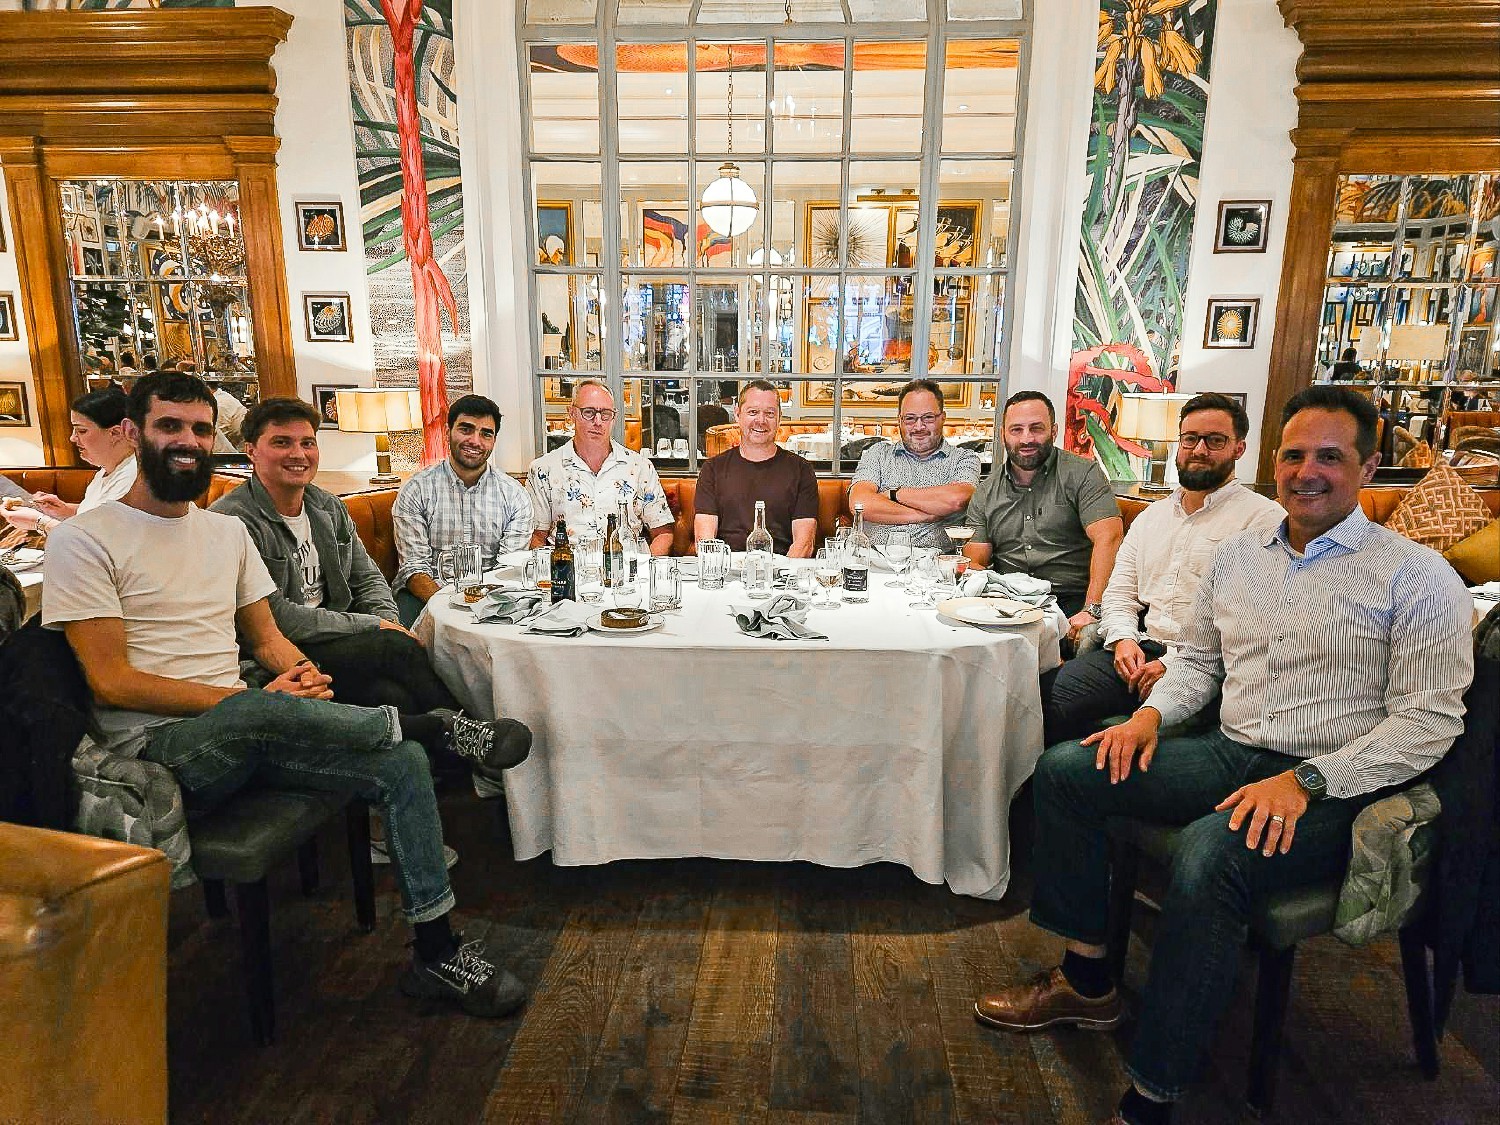 Our UK team members at a team dinner in Brighton, England.